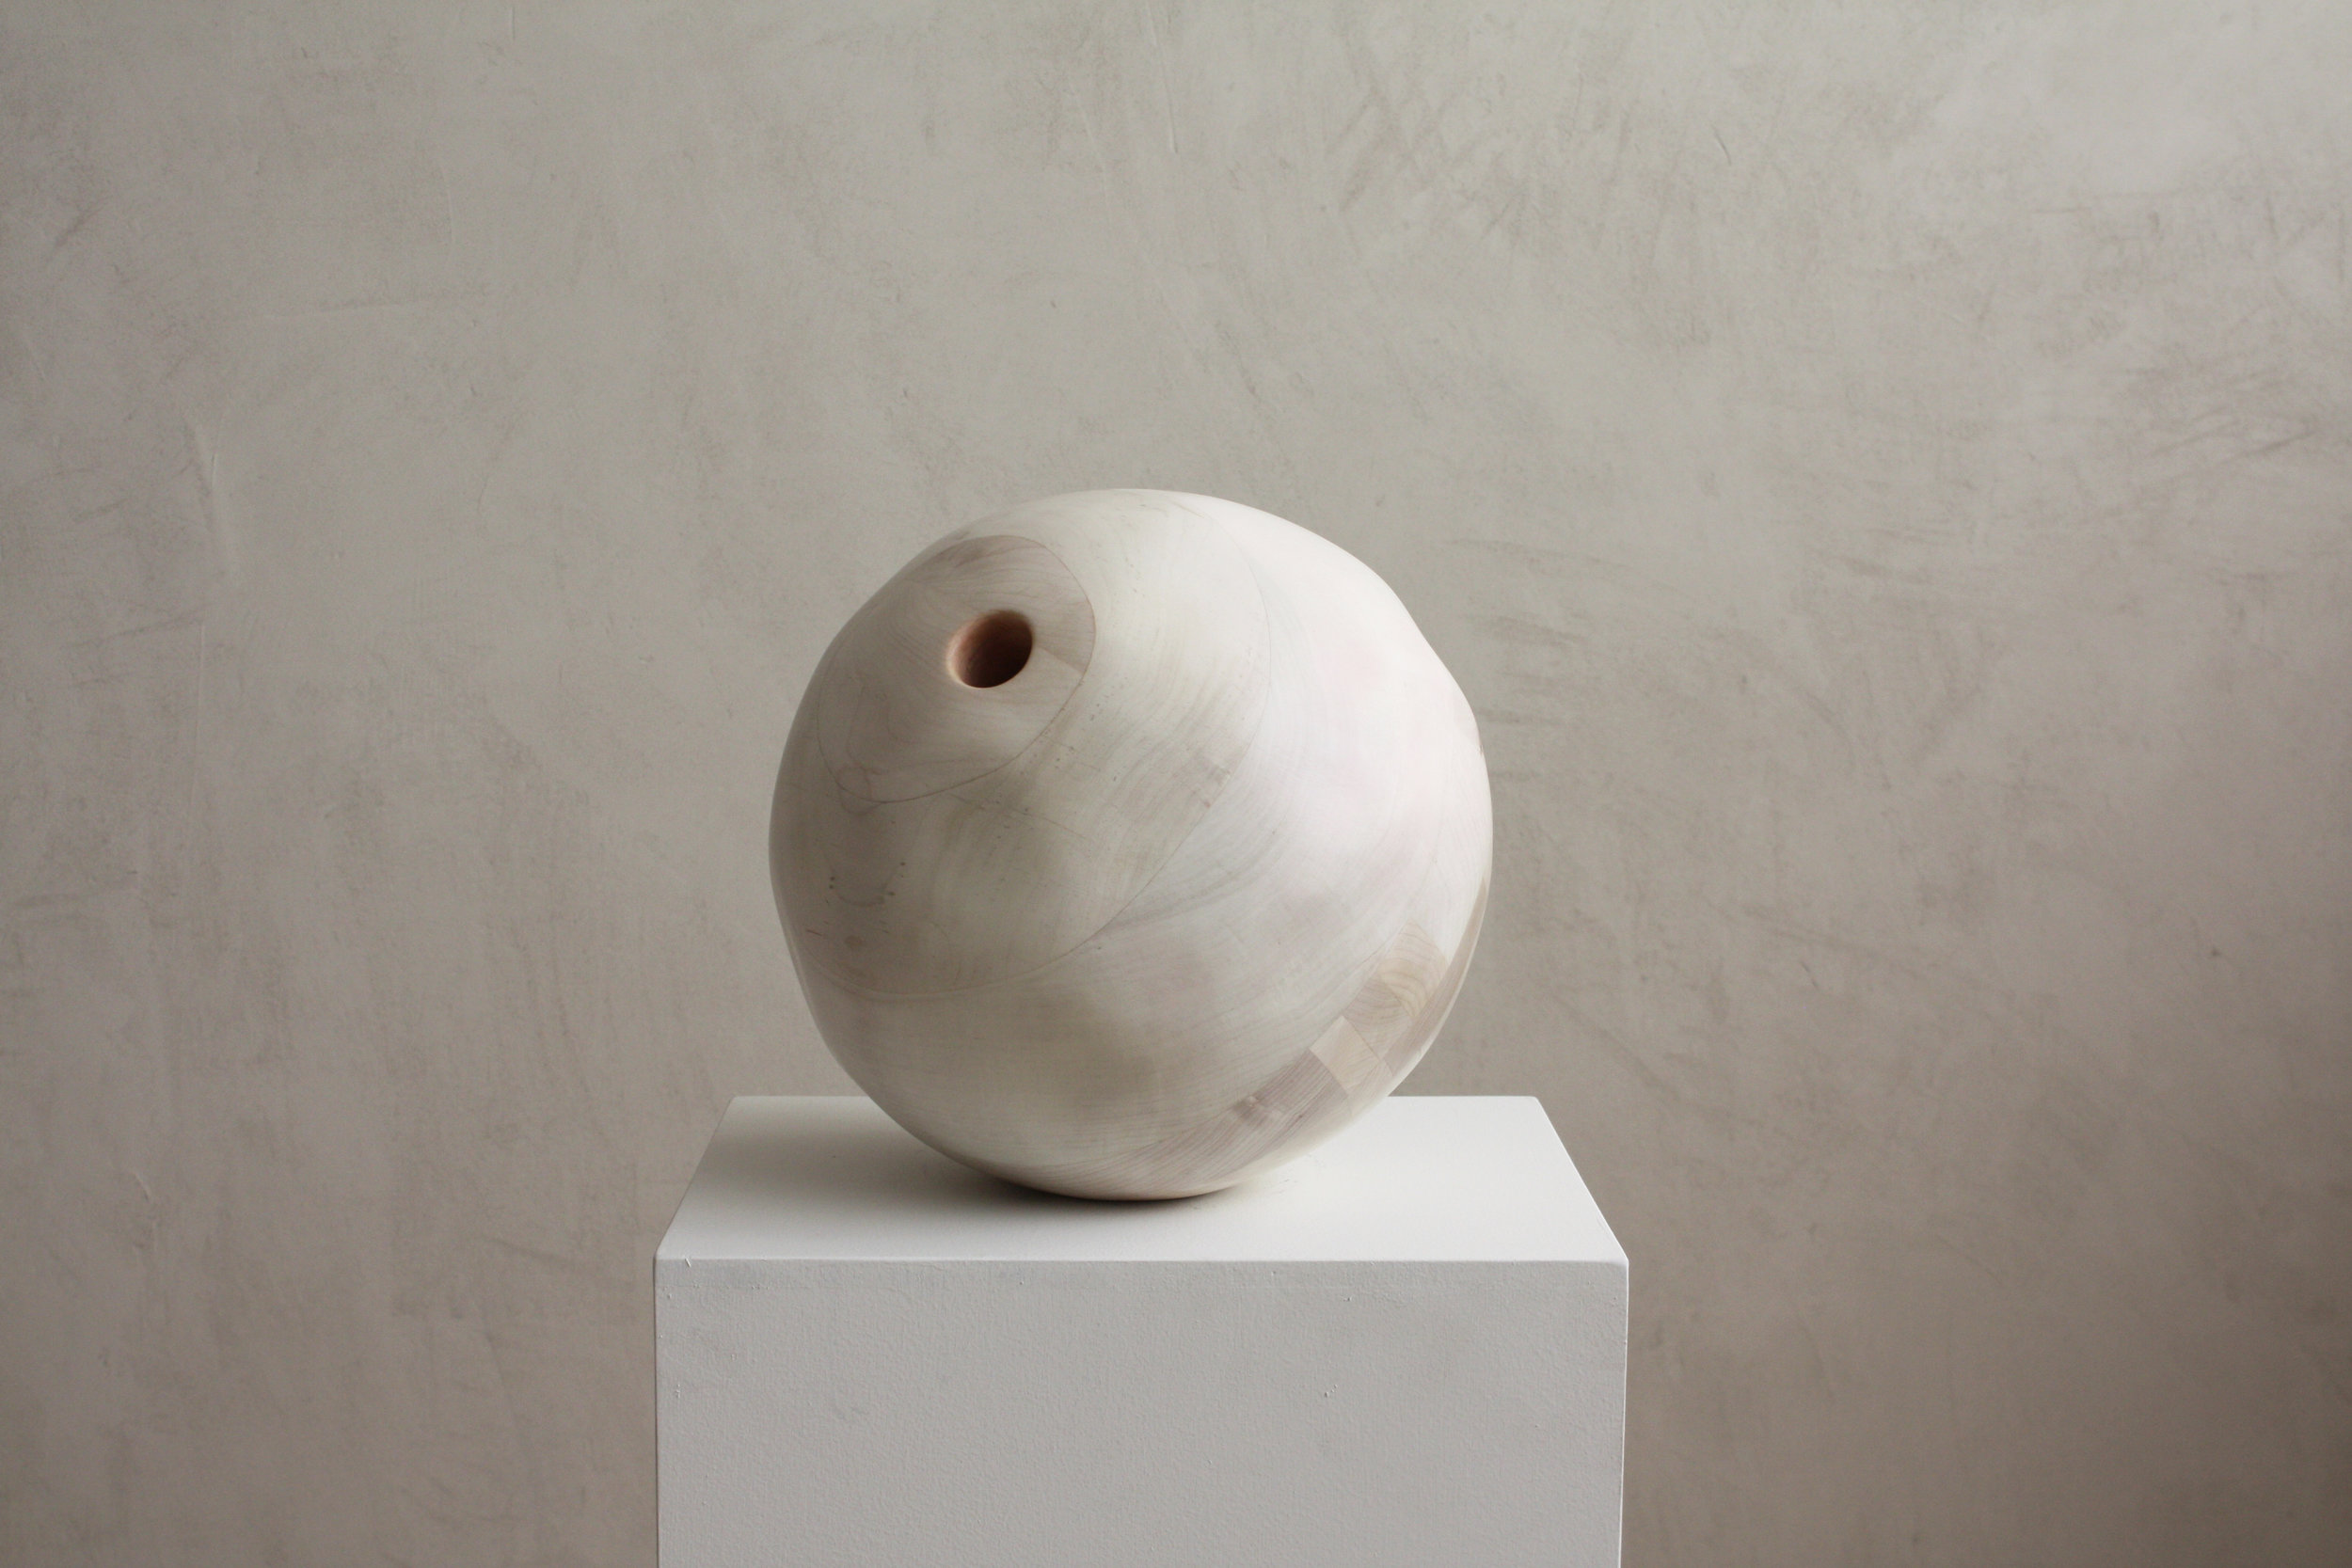 Ball with Hole, 2017